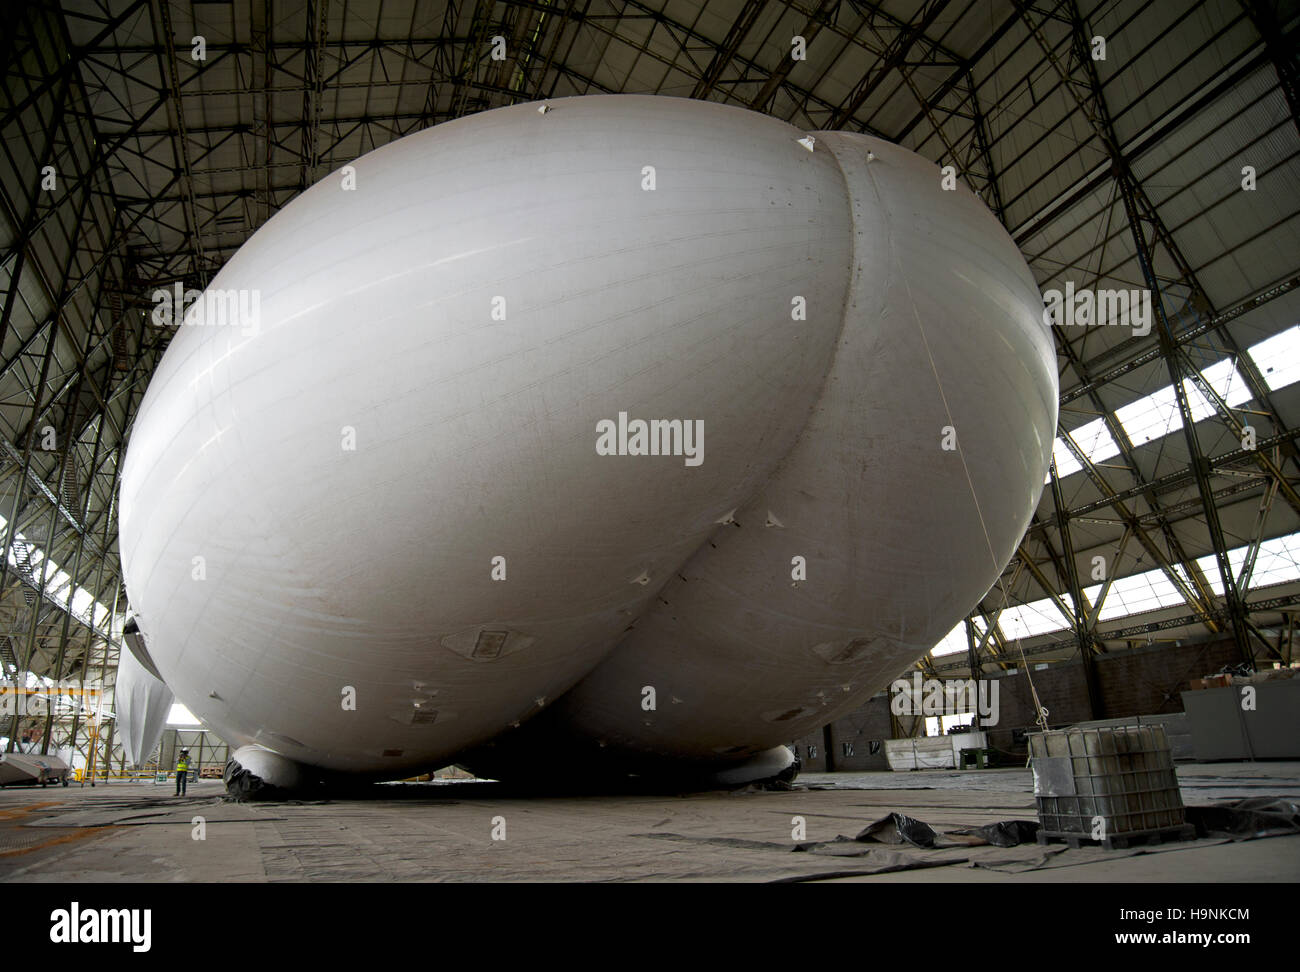 The distinctive double hull of the Hybrid Air Vehiles Airlander 10 airship, the worlds largest aircraft, in its shed at Cardington, Bedfordshire. Stock Photo